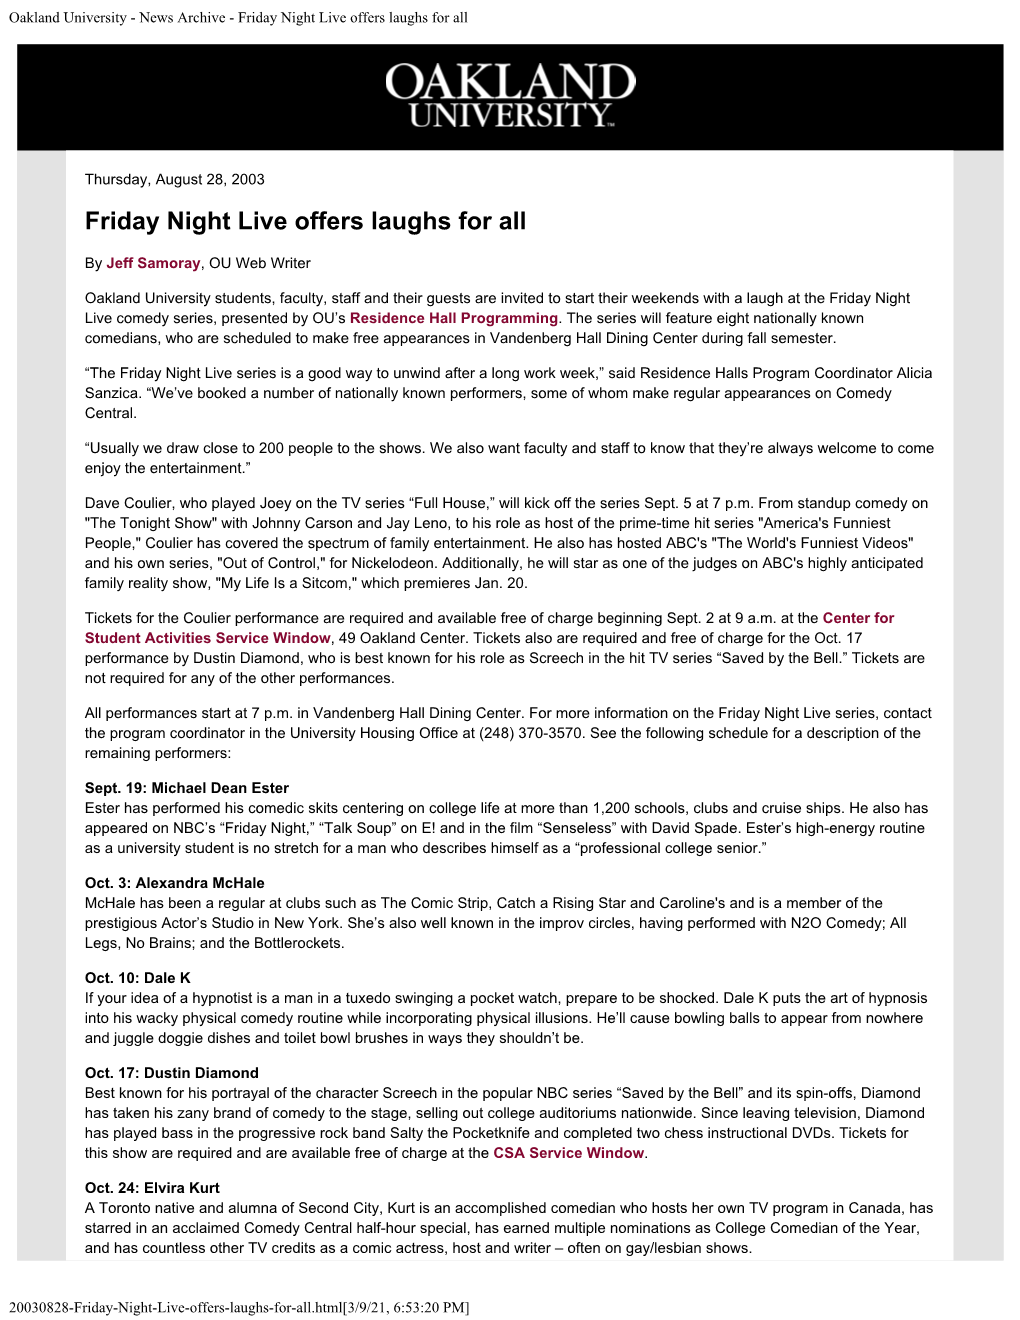 News Archive - Friday Night Live Offers Laughs for All